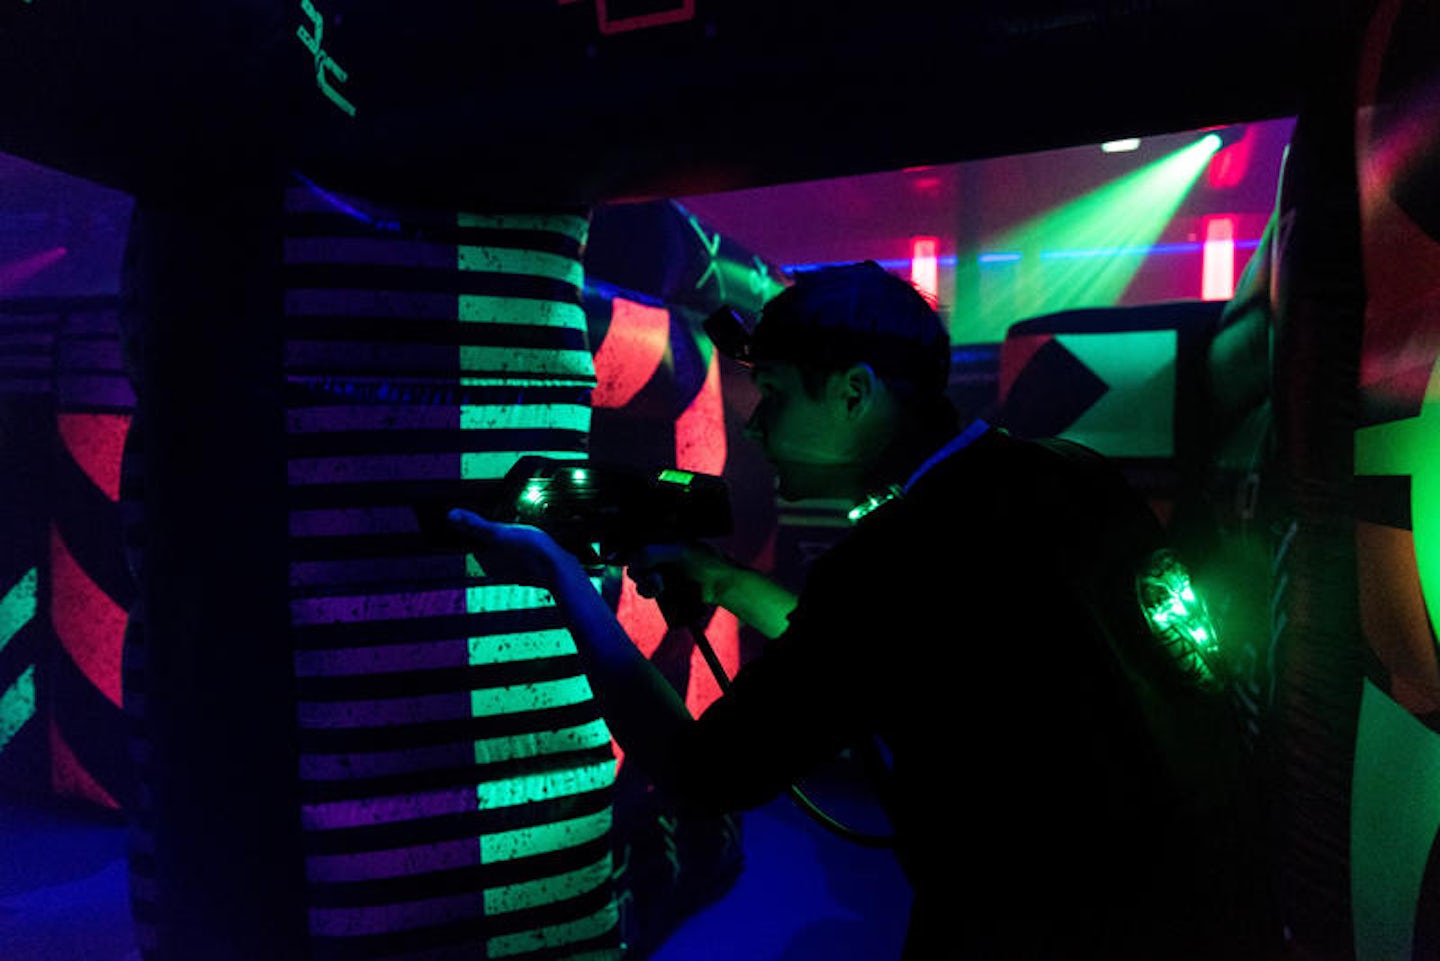 "The Battle for Planet Z" Laser Tag on Symphony of the Seas